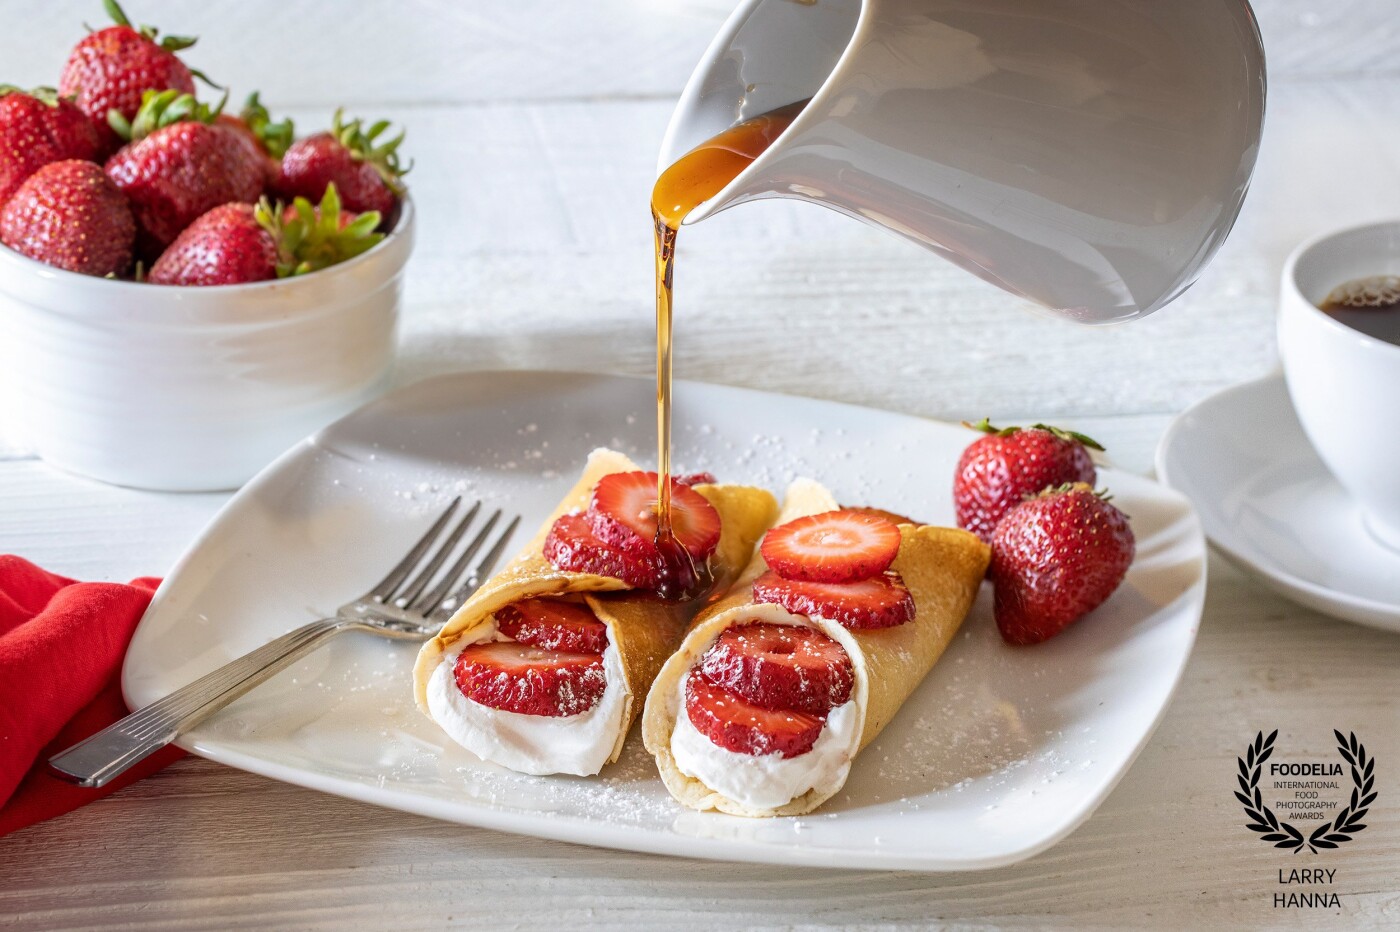 I prepared very thin pancakes and stuffed them with yogurt and sliced strawberries.  Next, the syrup was poured over them to make them even sweeter.